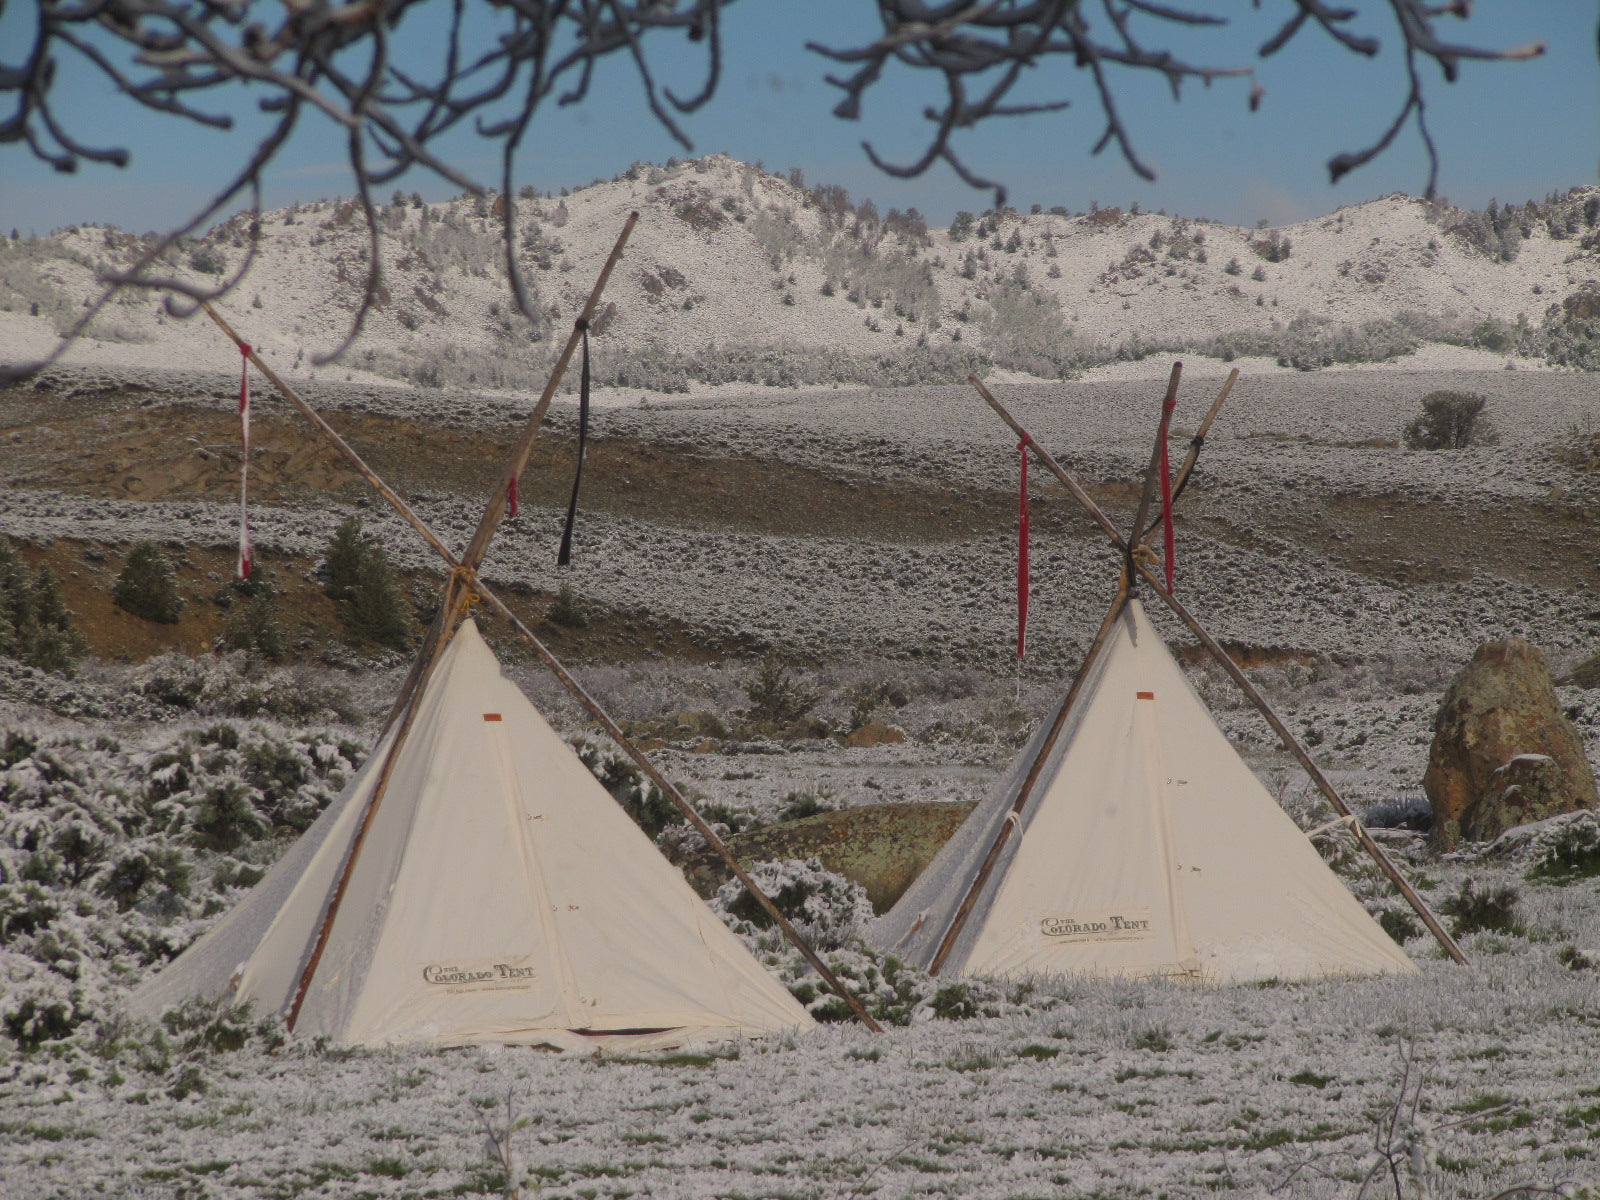 Colorado Tent (Denver Tent) - Cowboy Tipi (Range Tent) - In use at working ranch with natural lodge pole frame